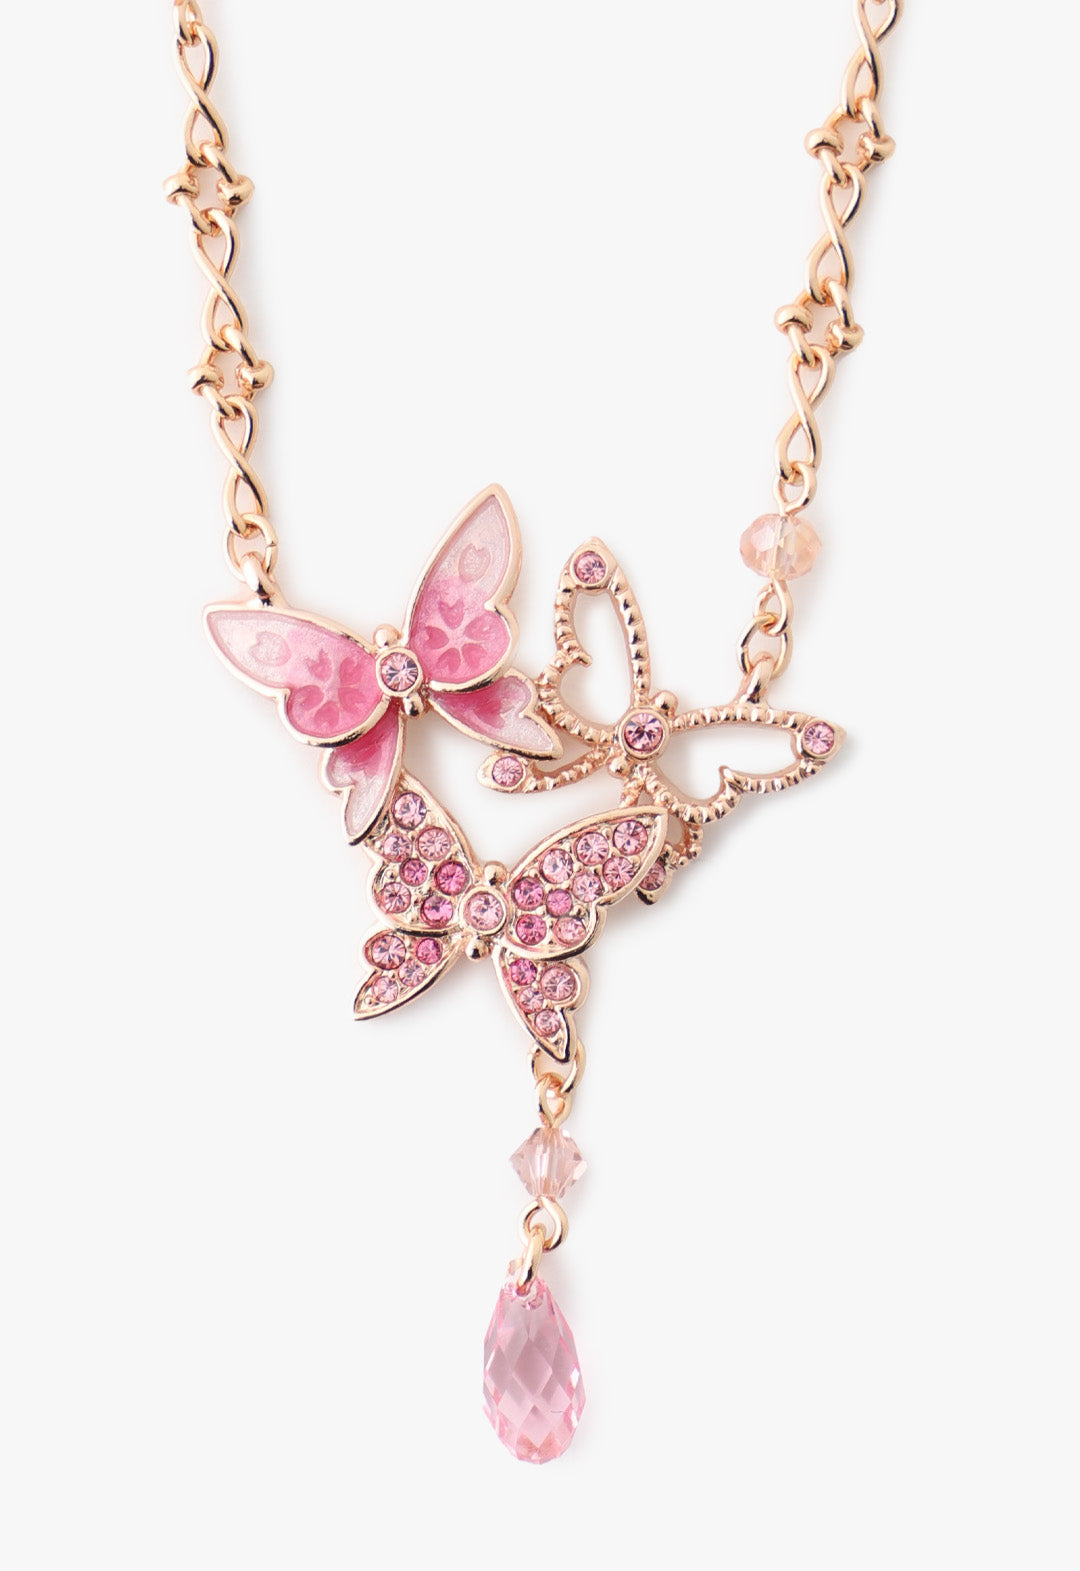 Bejeweled Butterfly Princess Necklace - Pink Rose Gold